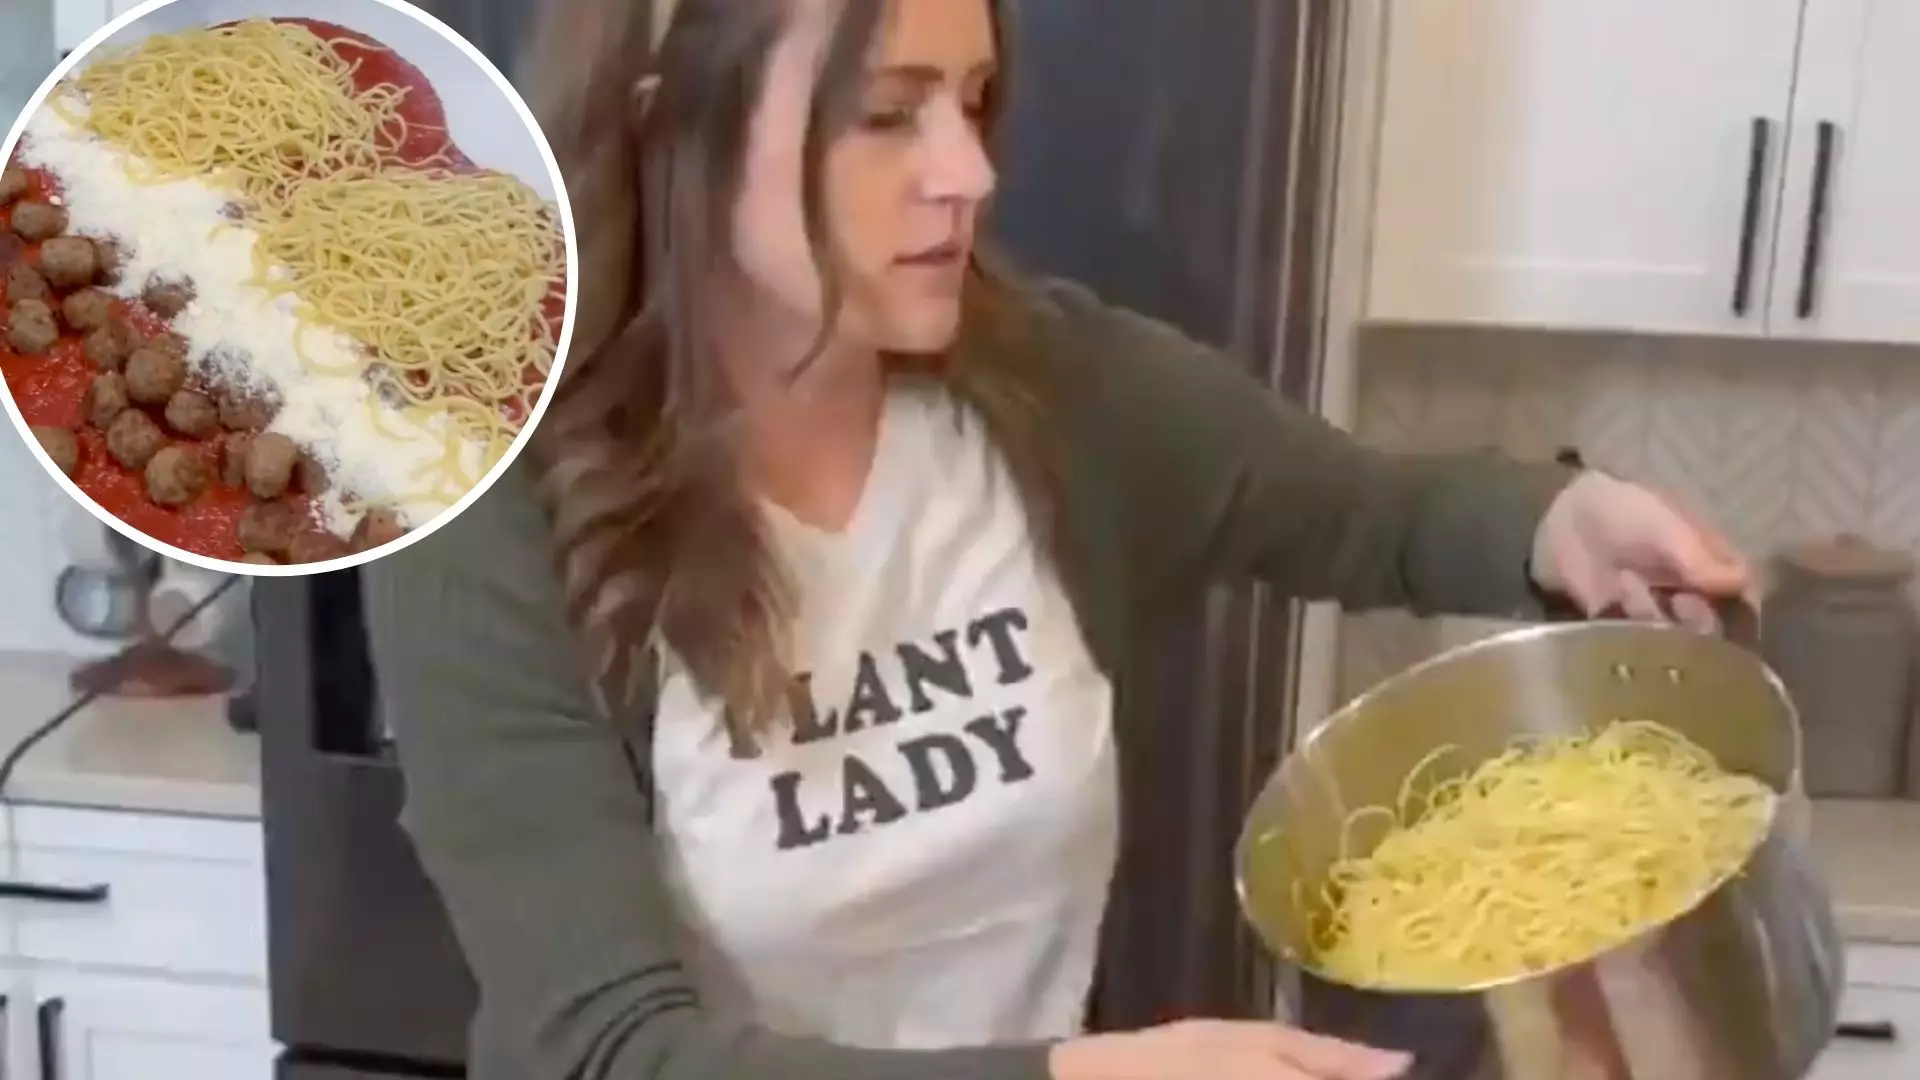 People Are Losing Their Minds Over Bizarre 'Ultimate Spaghetti Trick'